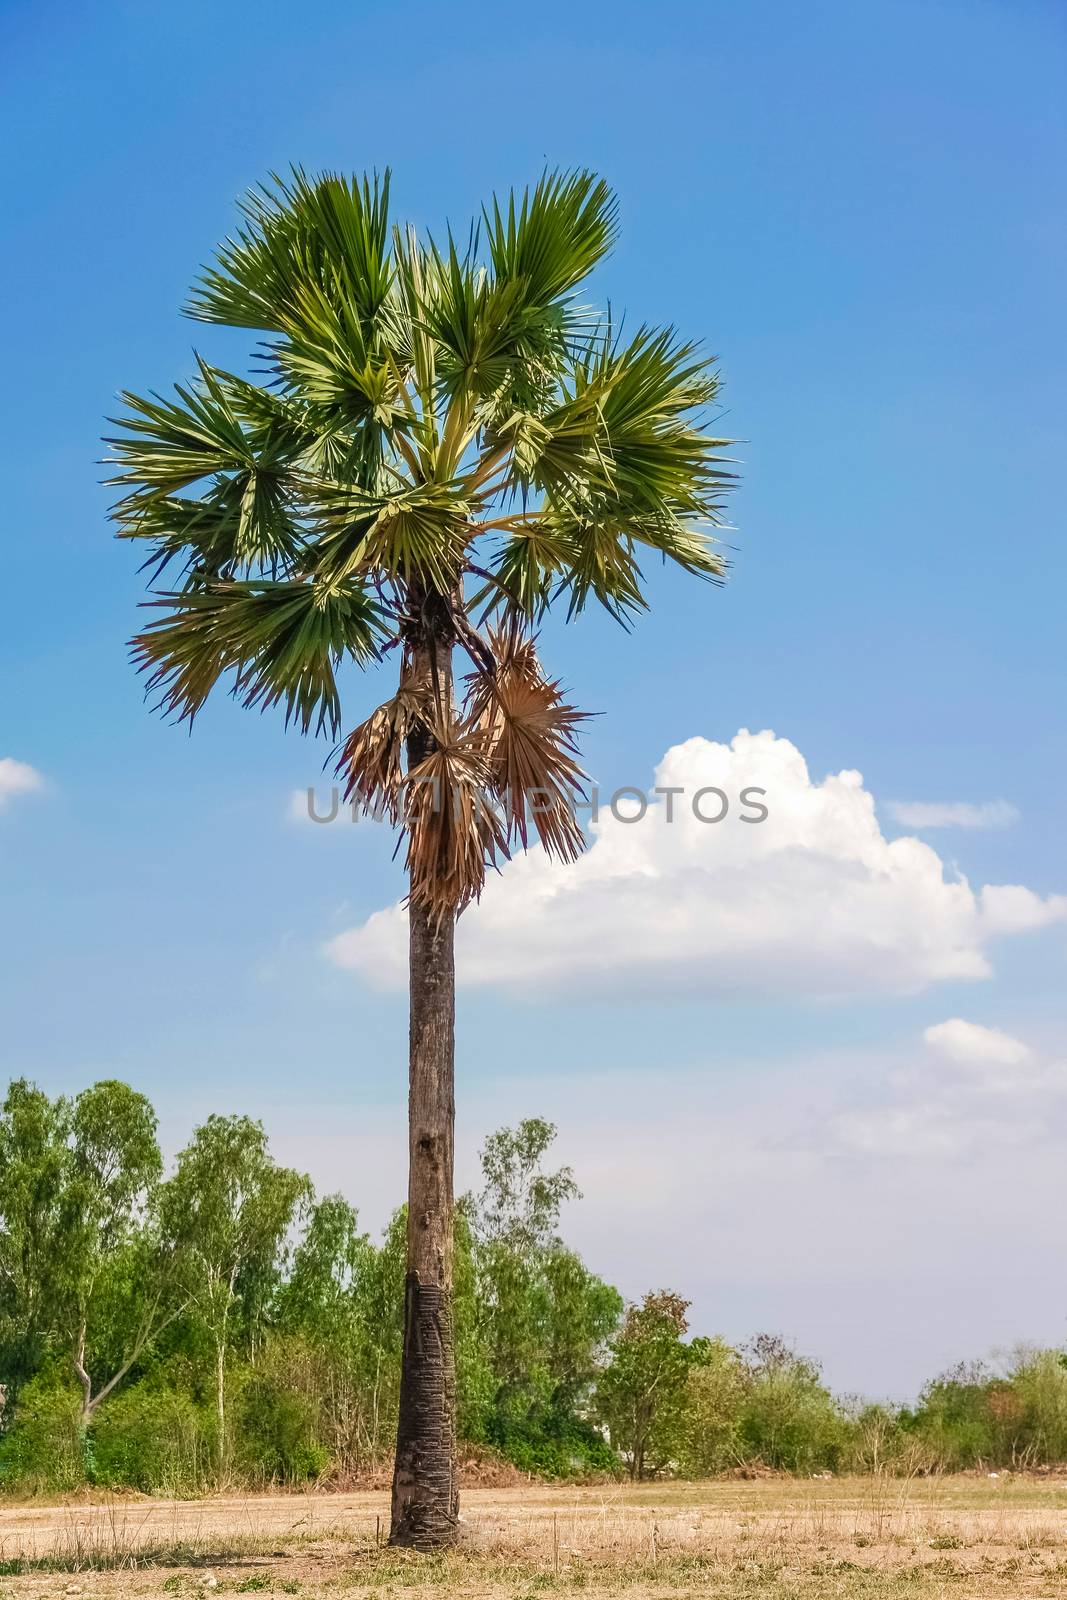 isolate sugar palm tree on dry ground with blue sky and clouds